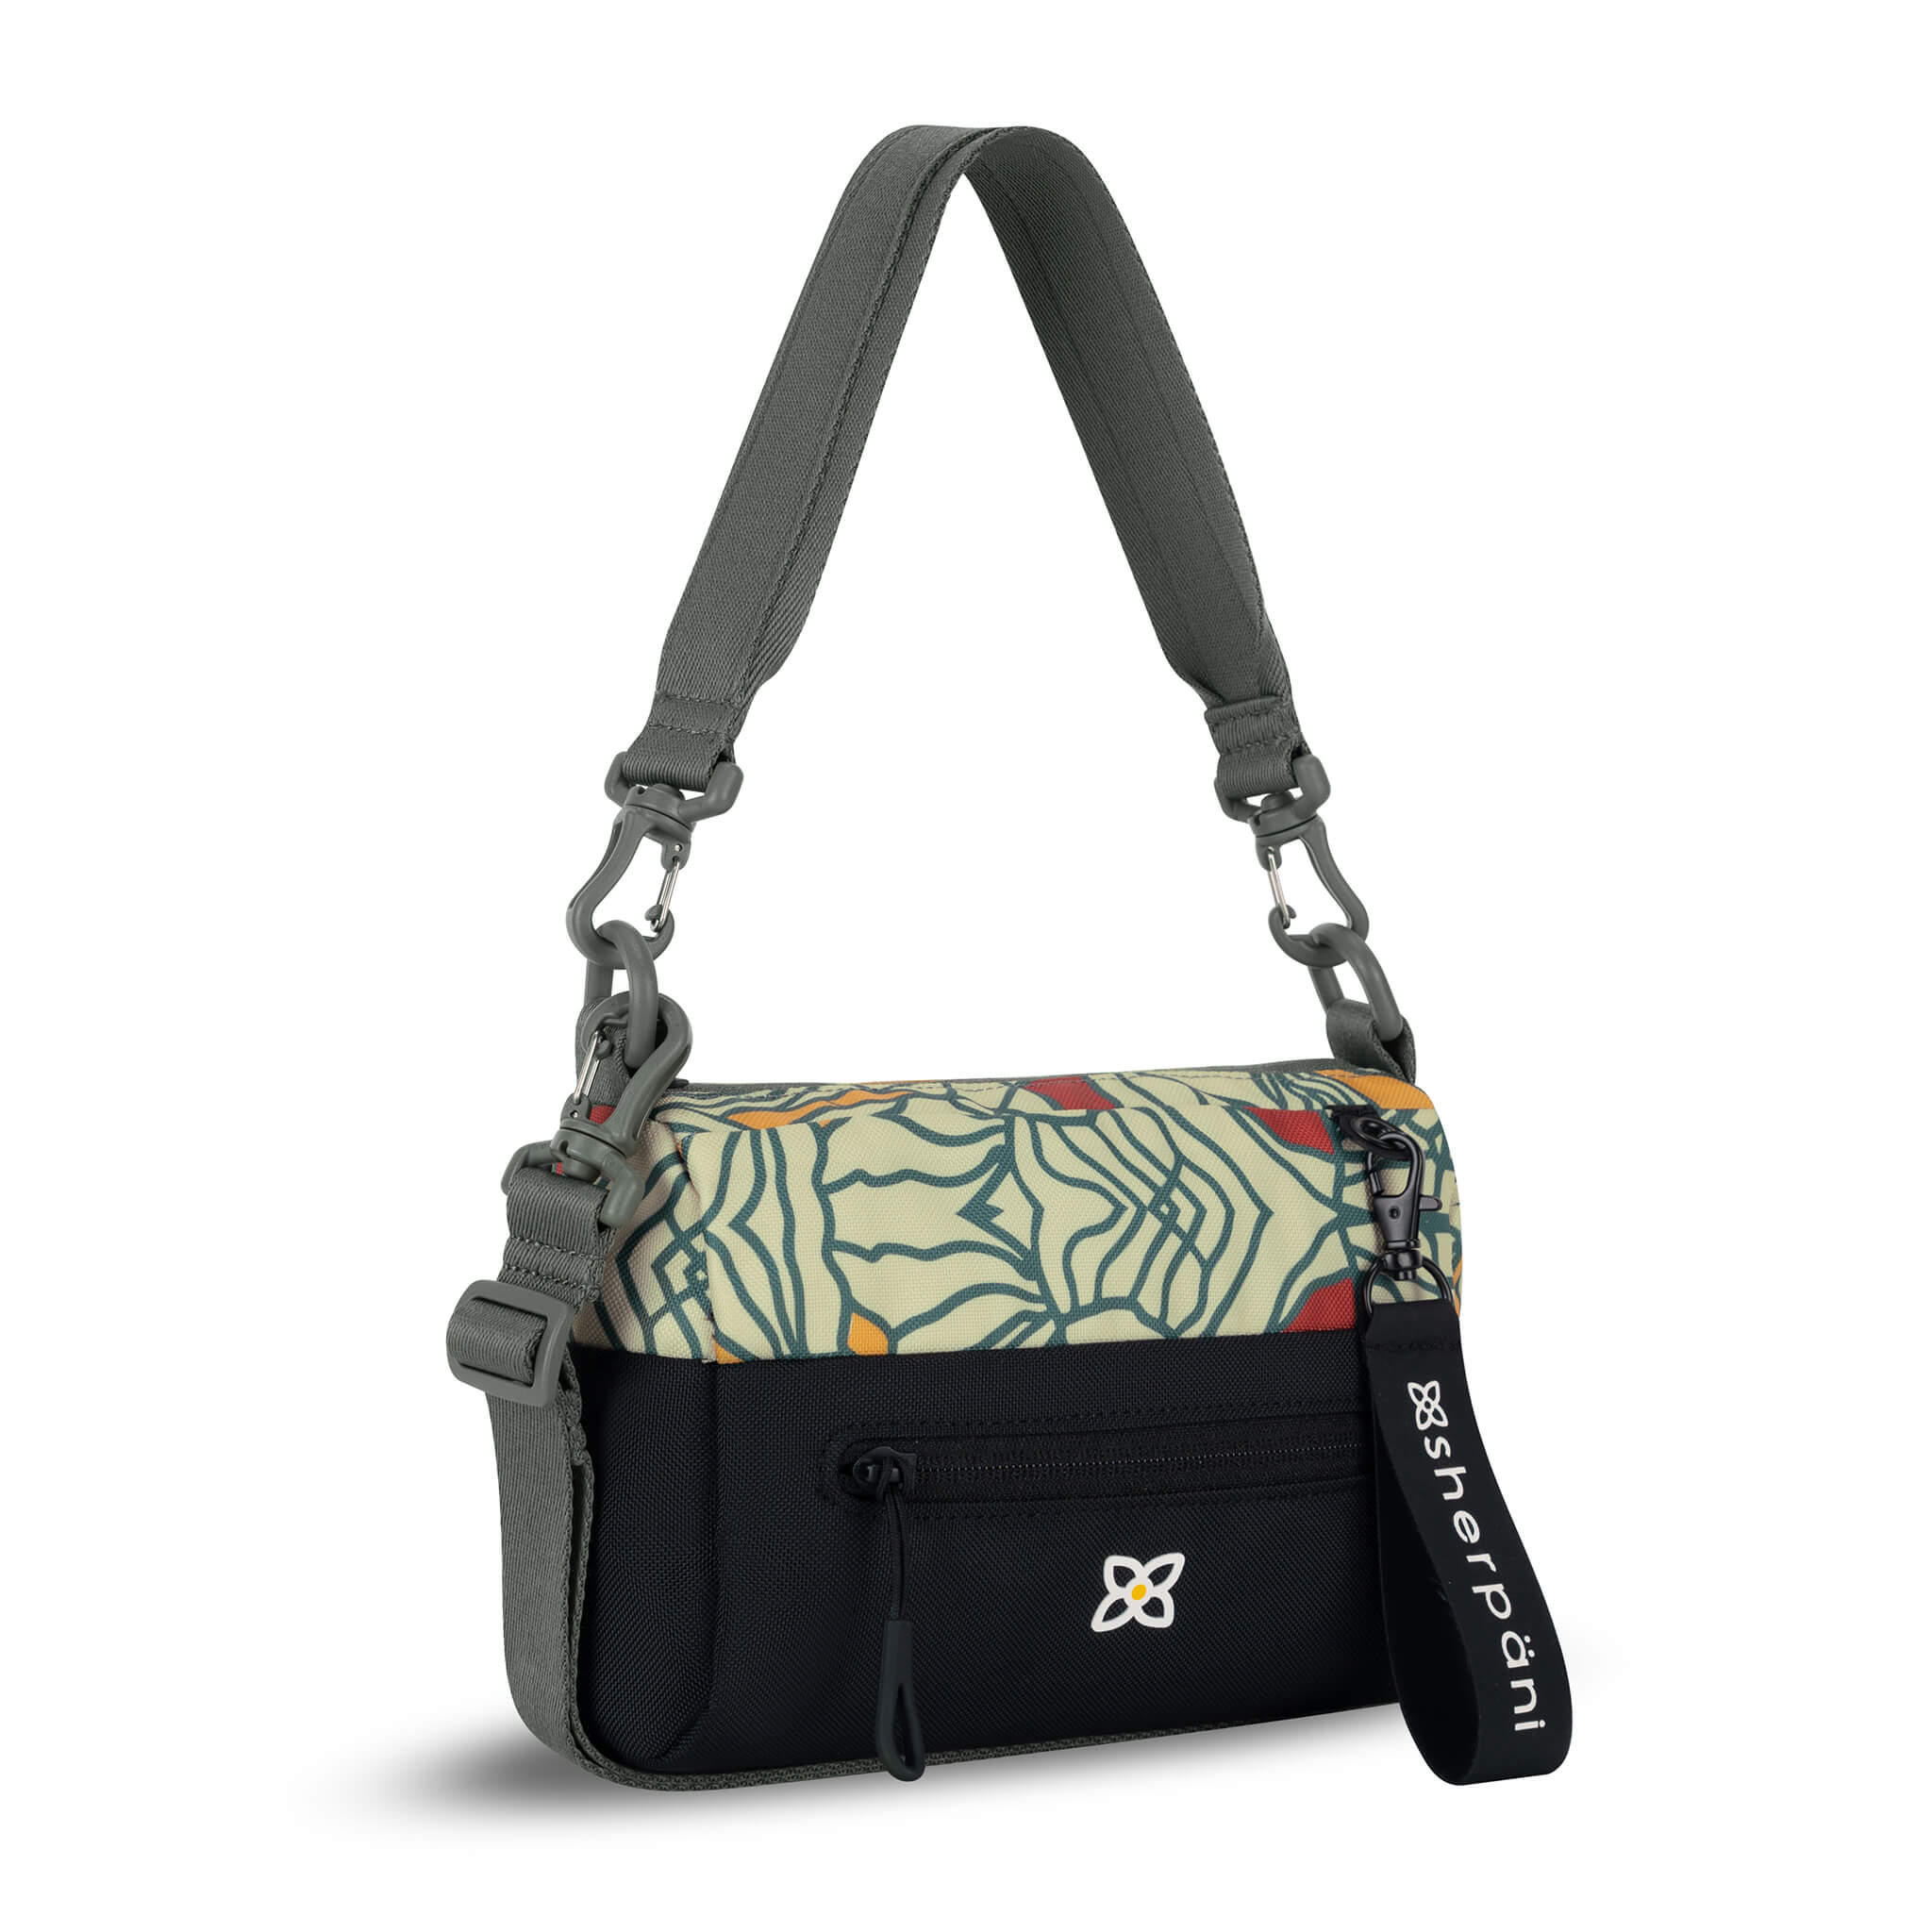 Angled front view of Sherpani mini shoulder bag, the Skye in Fiori. Skye features include RFID security, detachable keychain, outside zipper pocket, two inside zipper pockets and two removable straps: a short shoulder strap and a longer adjustable crossbody strap. The Fiori colorway is two-toned in black and a floral pattern with a neutral color palette.